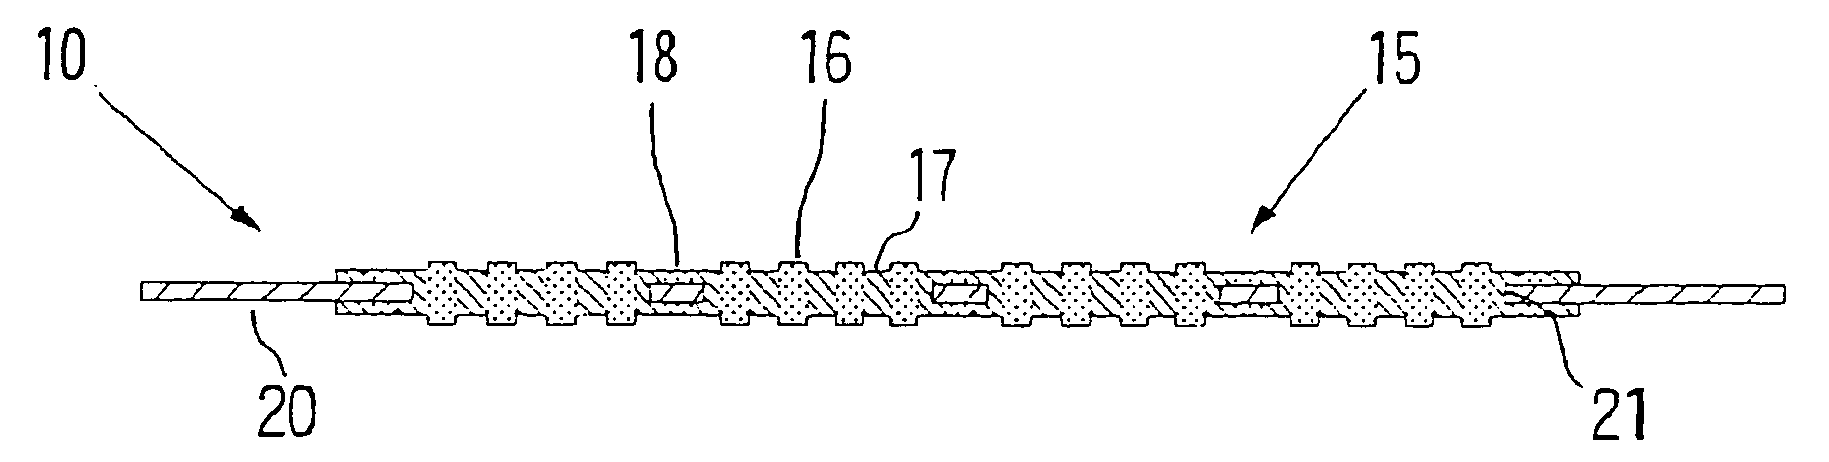 Anisotropic conductive connector and wafer inspection device